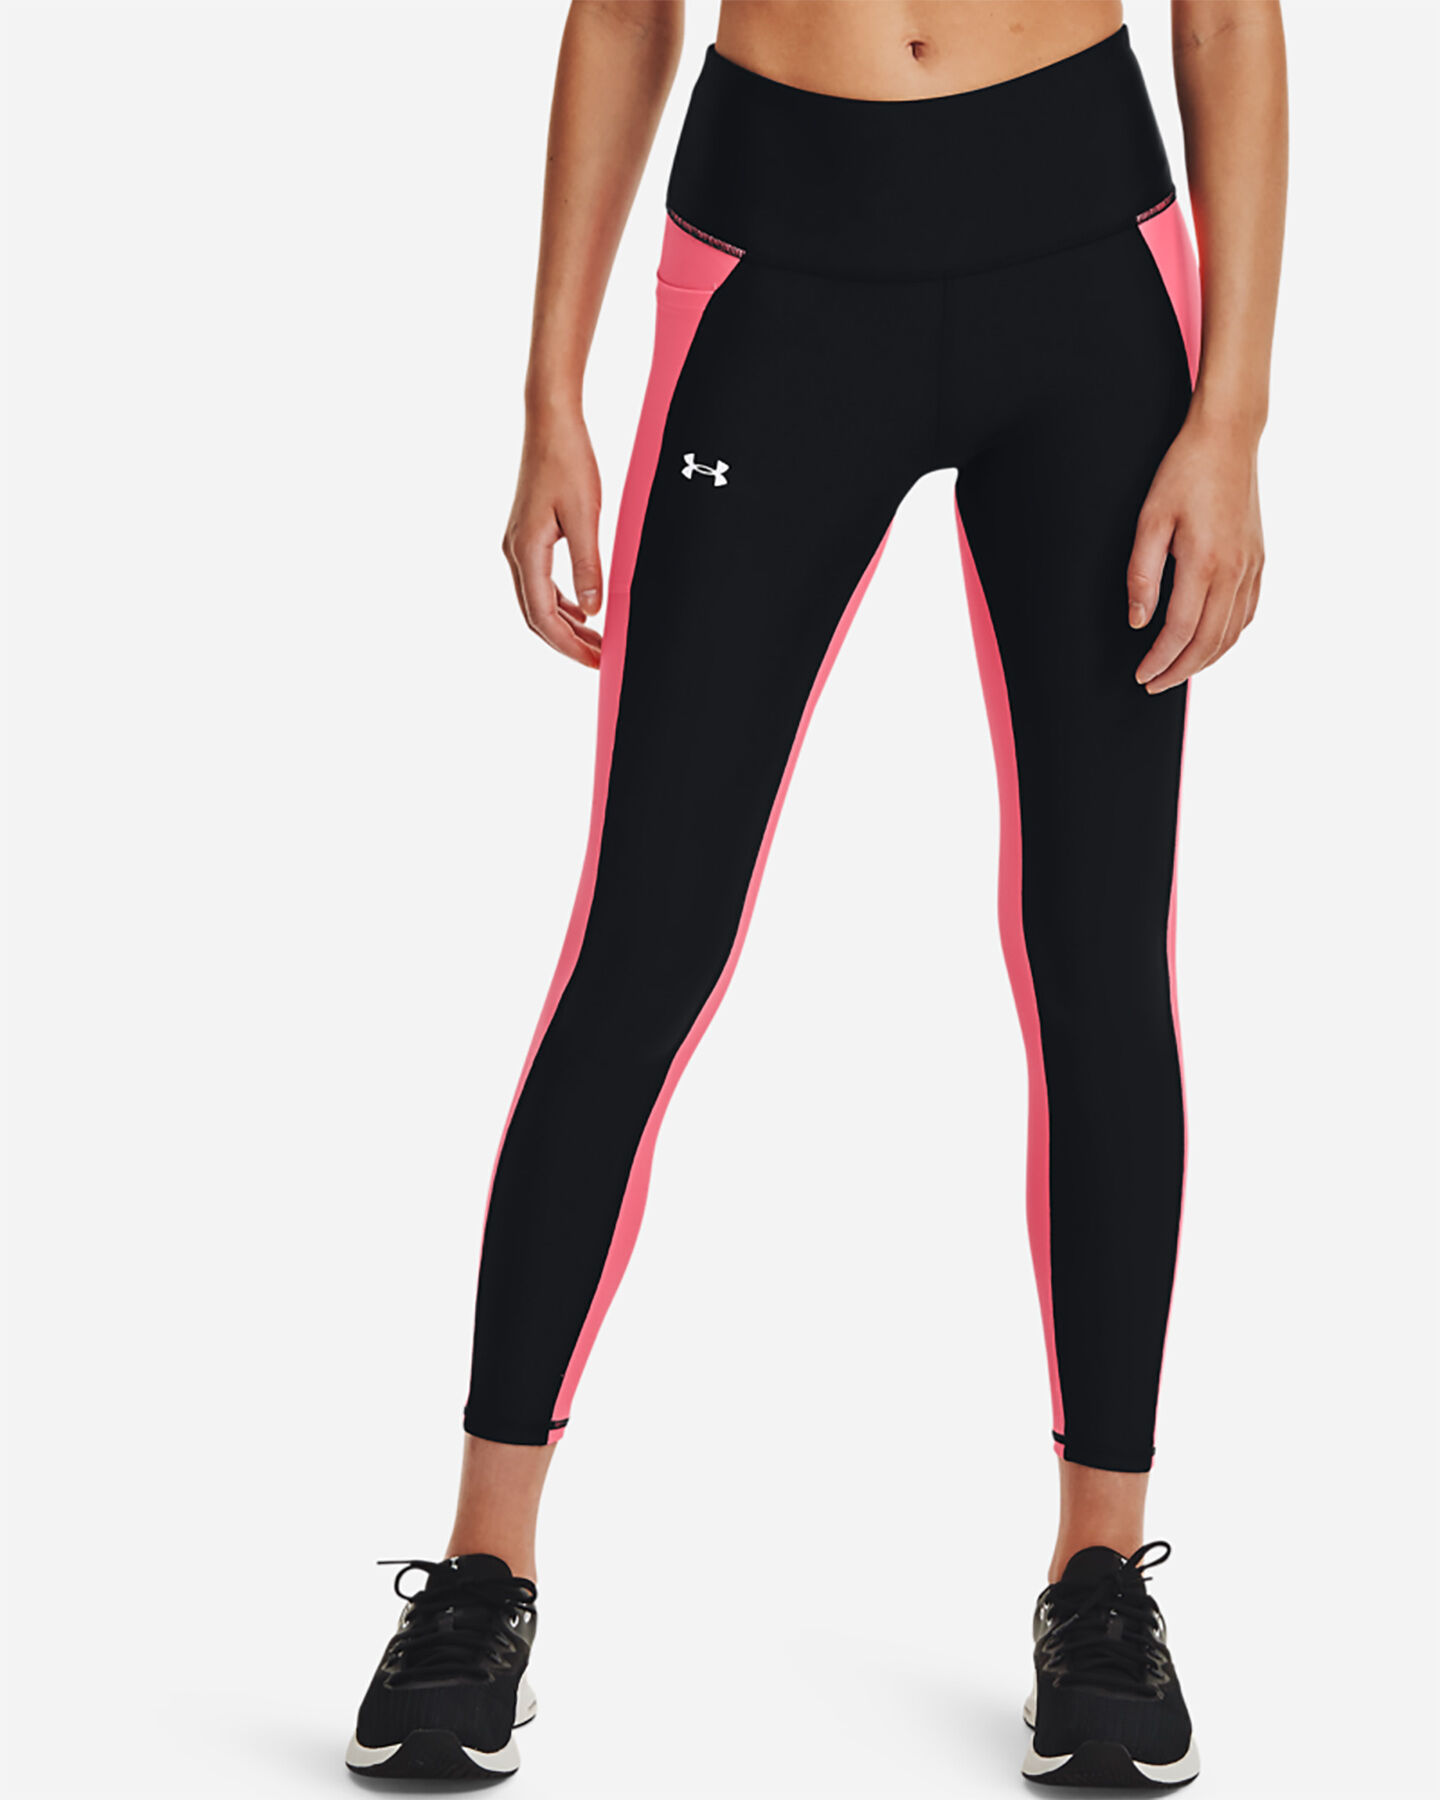  Leggings UNDER ARMOUR LATERAL INSERT 7/8 W S5336860|0001|XS scatto 2